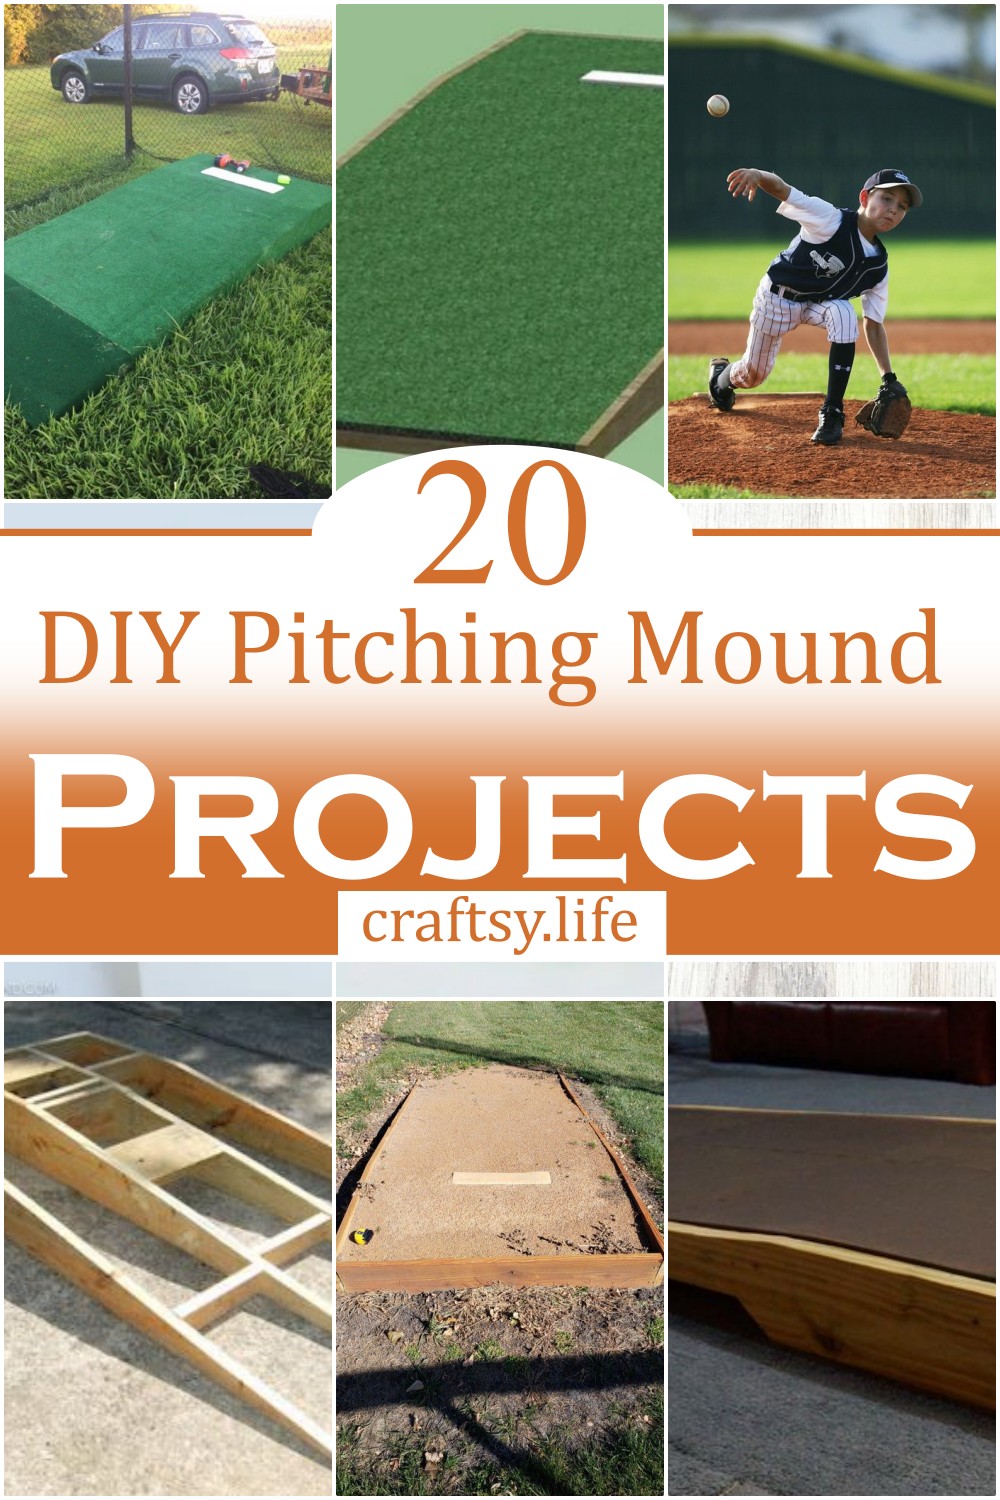 DIY Pitching Mound Projects